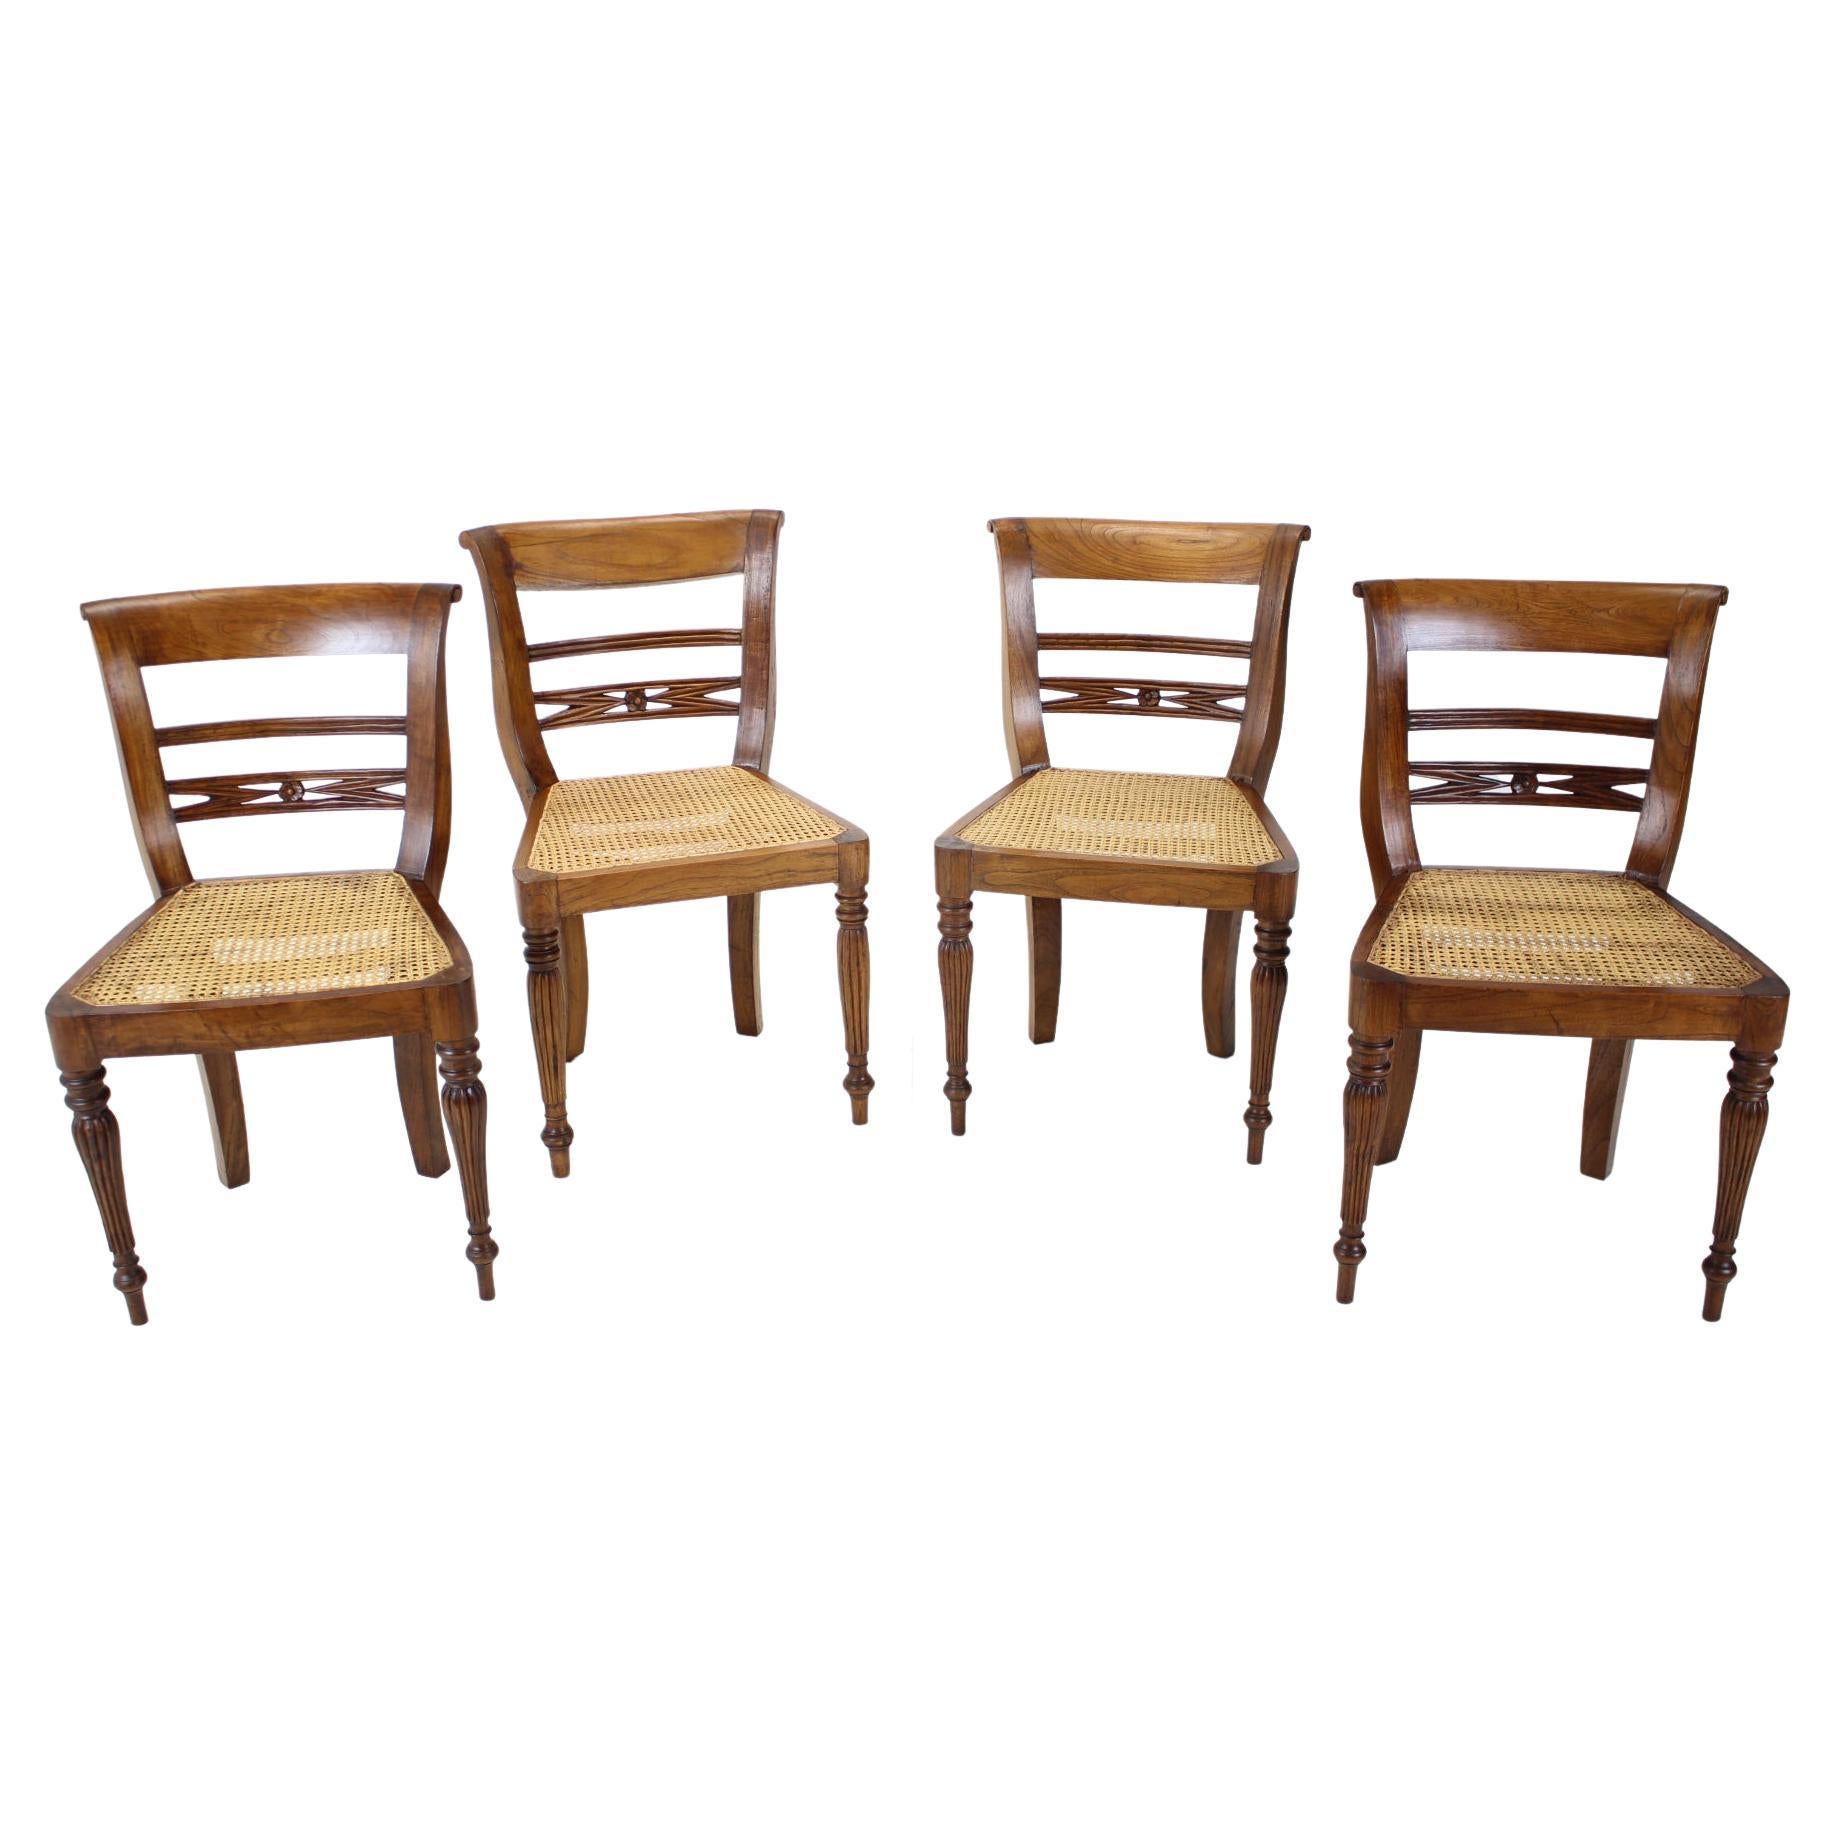 Set of Four Dining Chairs, Made of Solid Wood, 1950s, Czechoslovakia